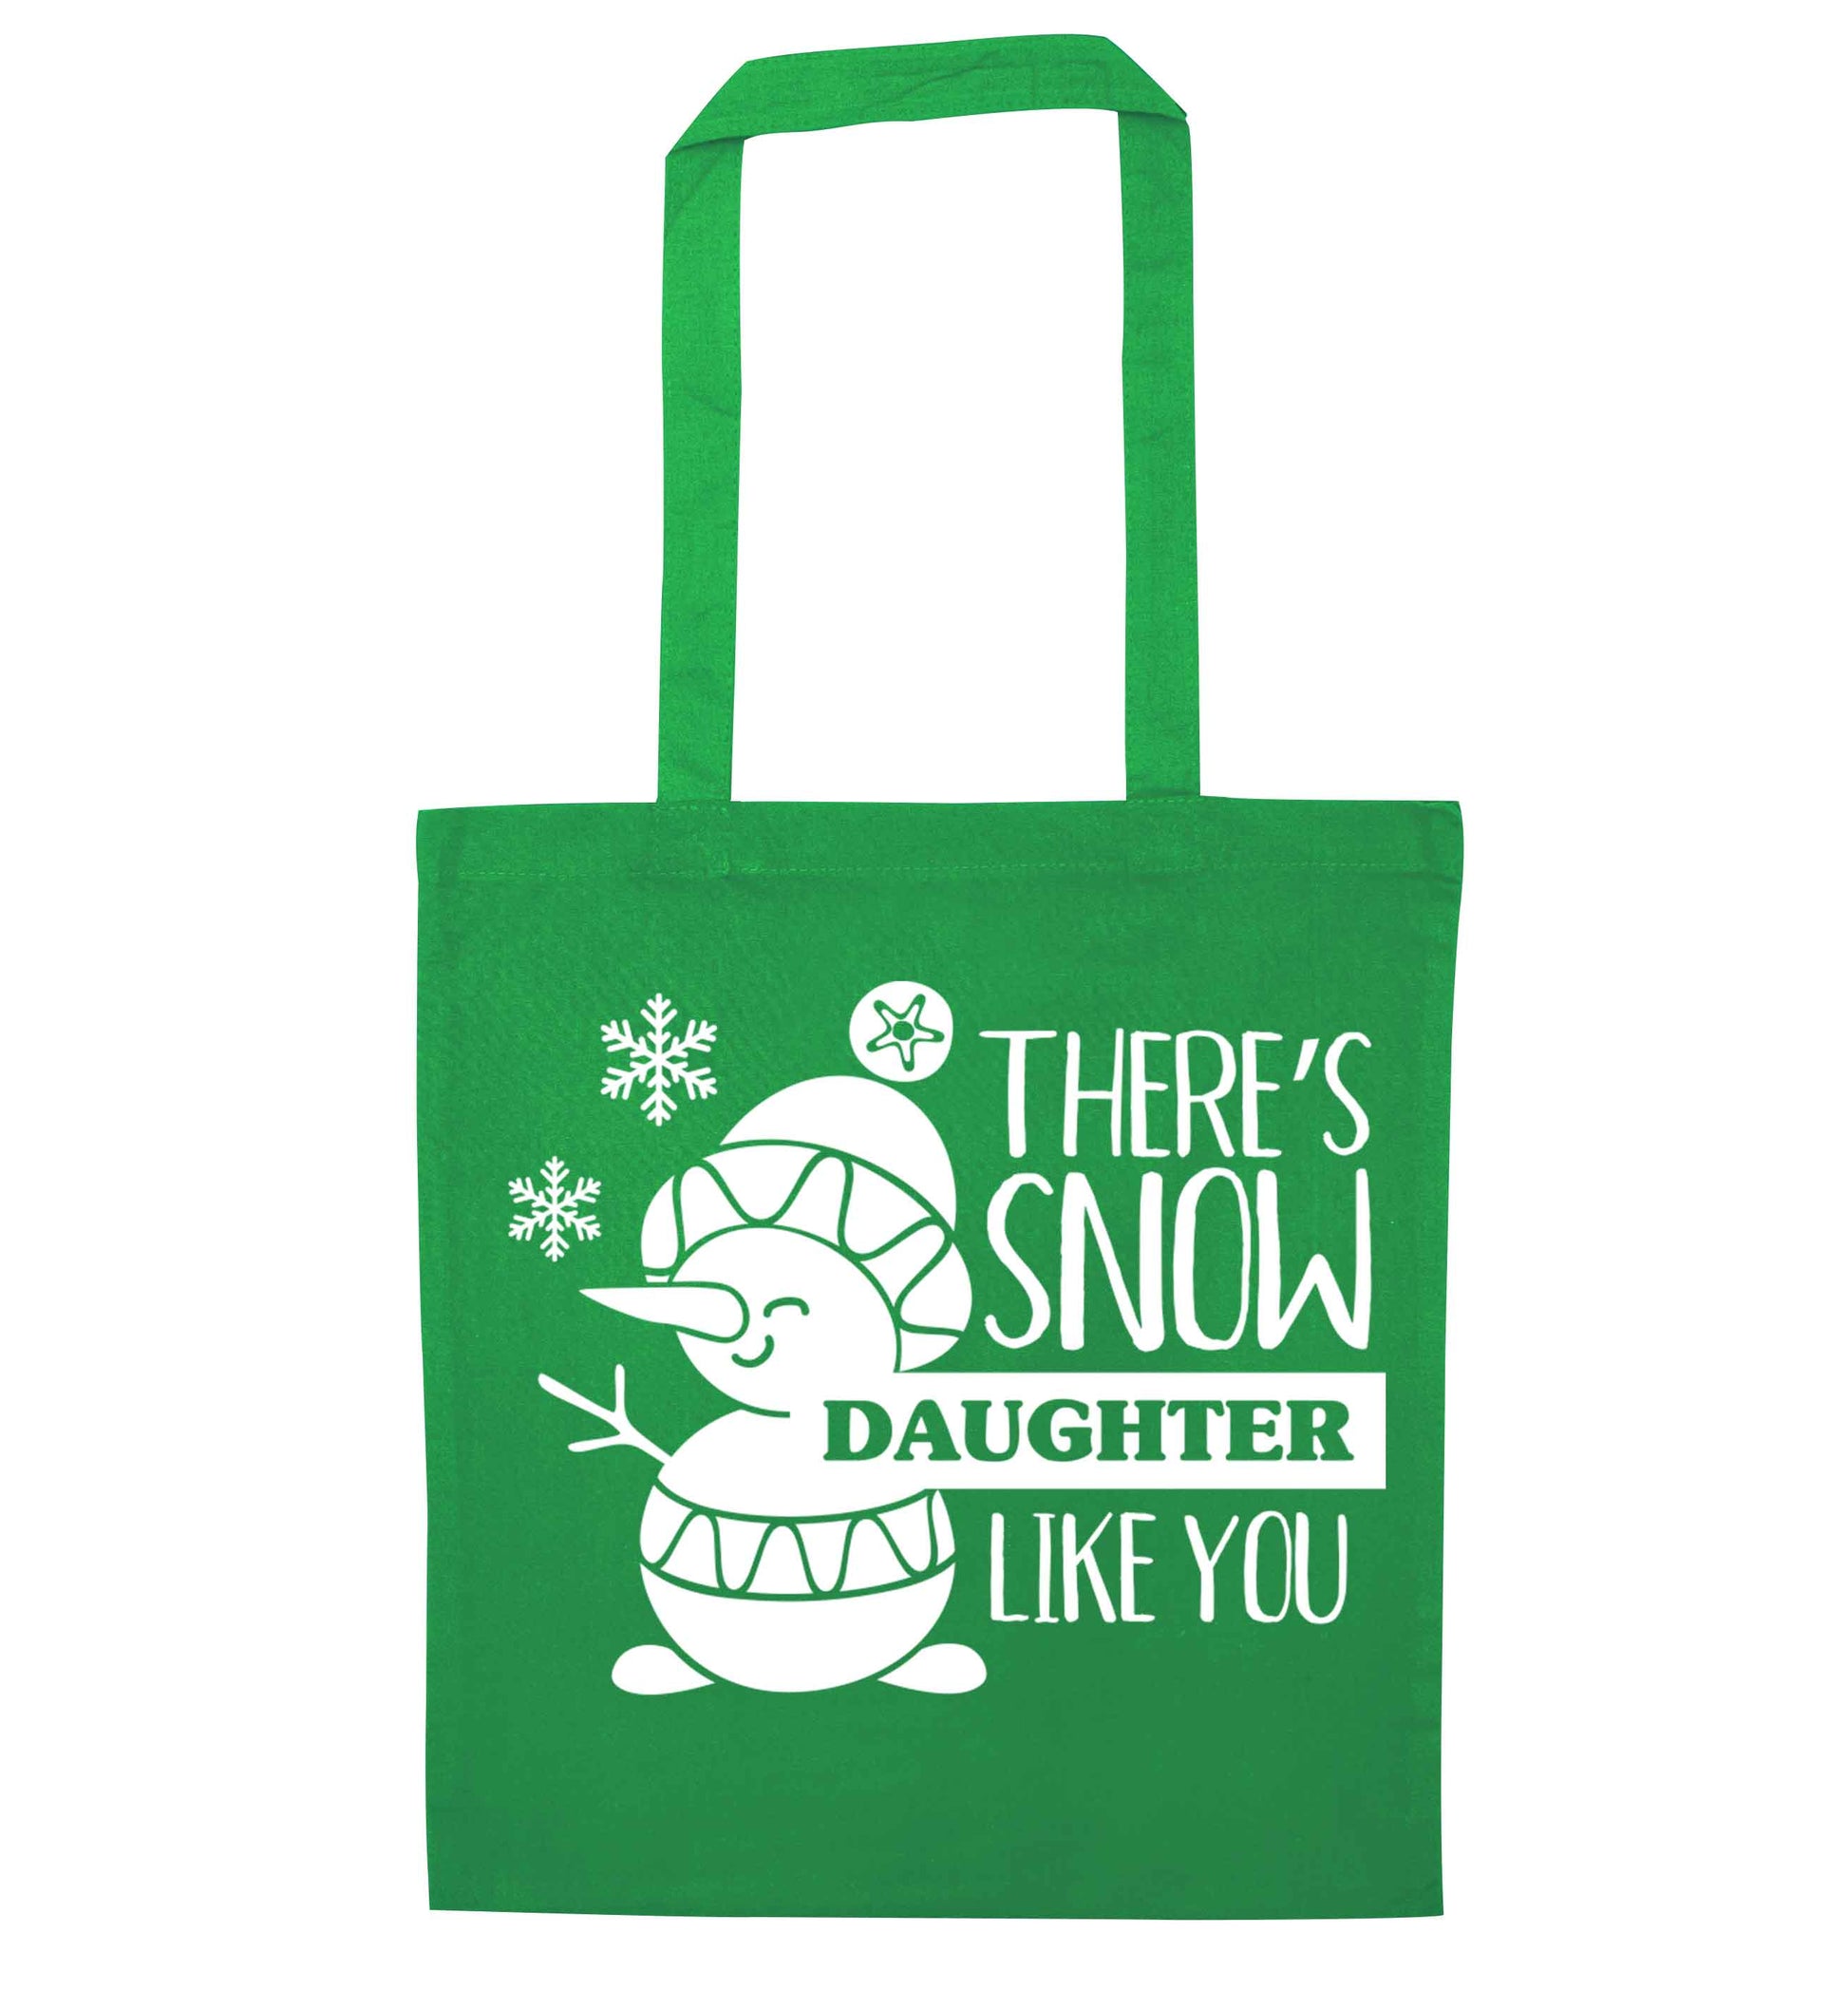 There's snow daughter like you green tote bag